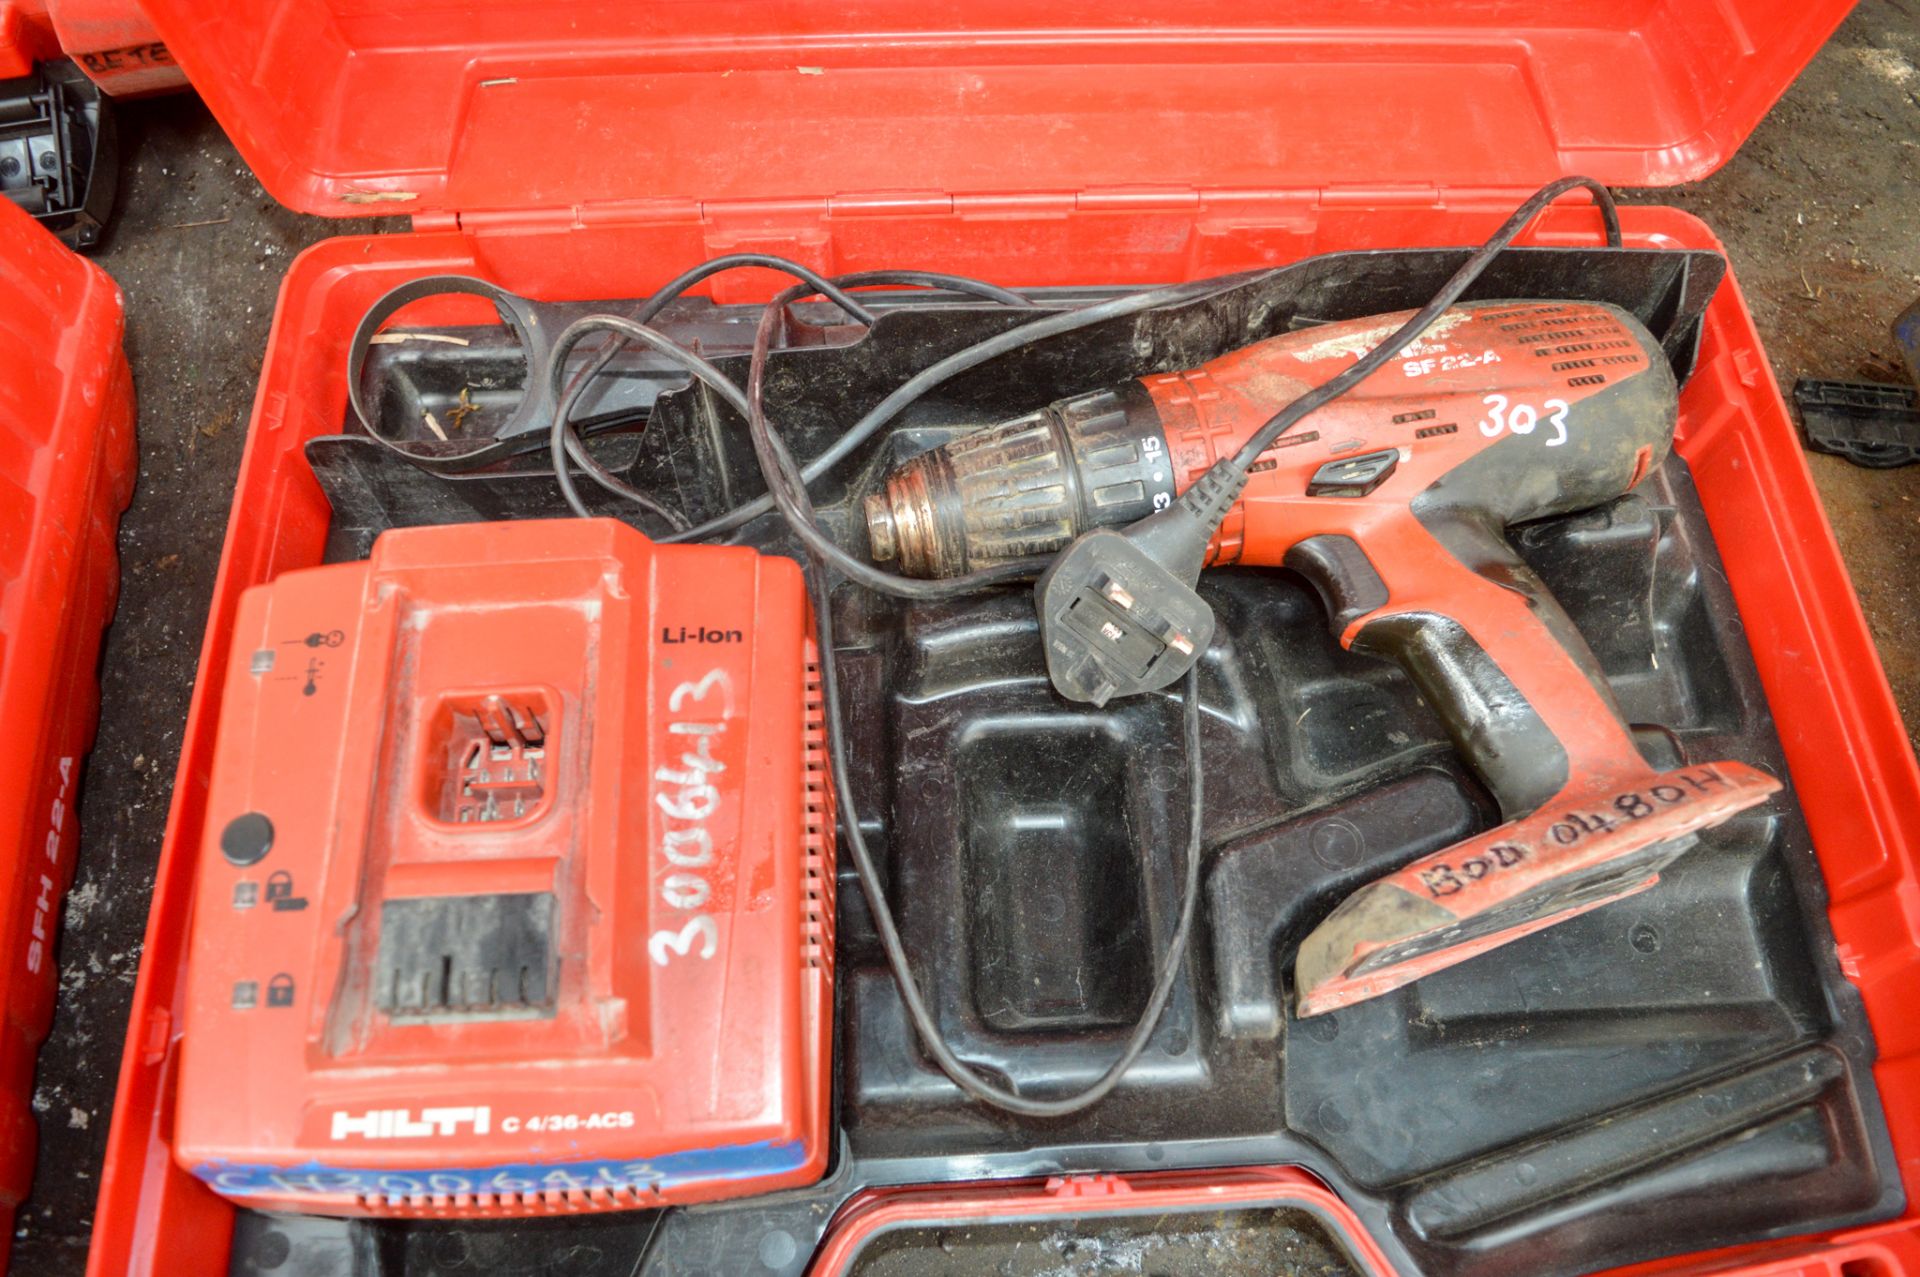 Hilti SF22-A cordless power drill c/w charger & carry case **No battery** BOD0480H